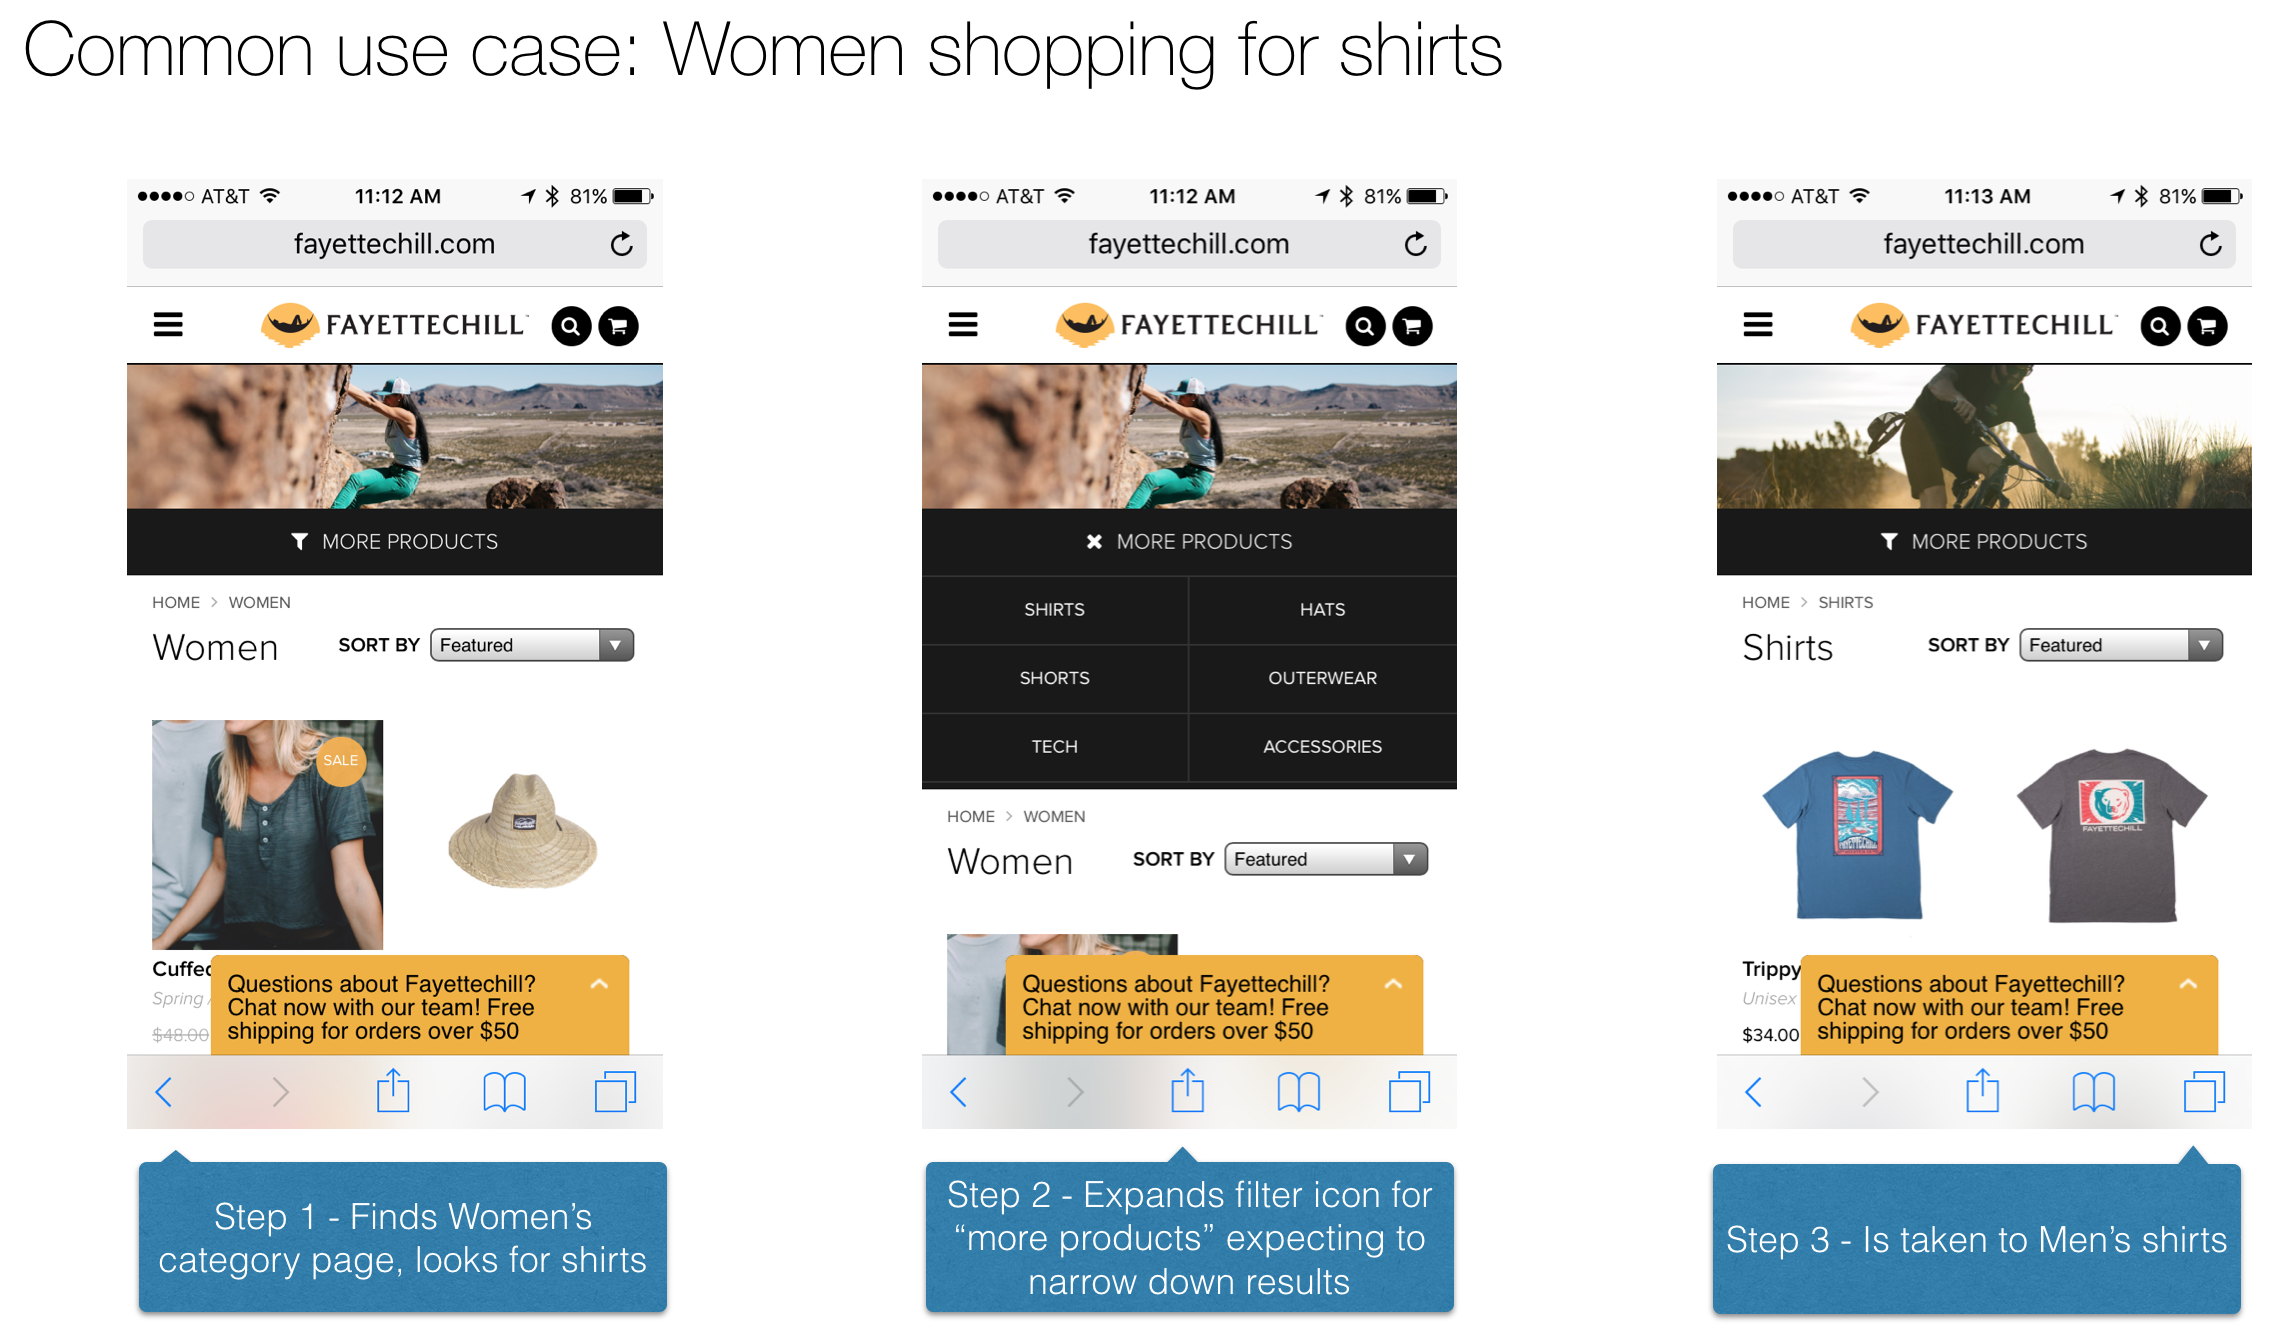 Common use case: women shopping for shirts